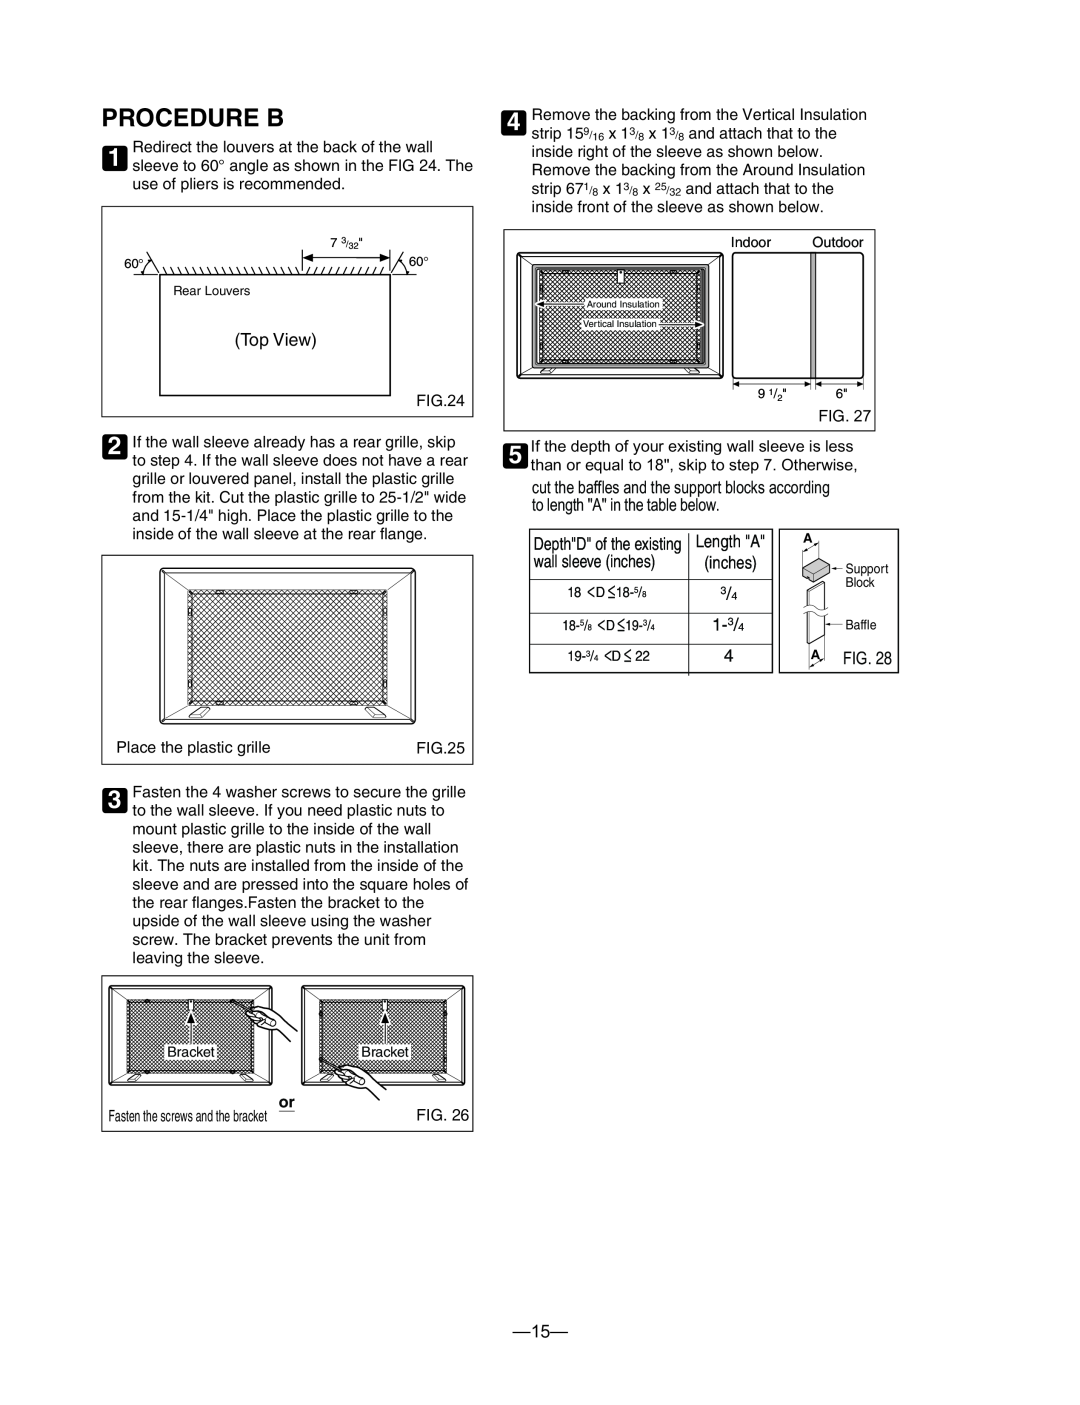 Heat Controller BG-103A service manual Procedure B, Afig, Top View, wall sleeve inches, 1-3/4 